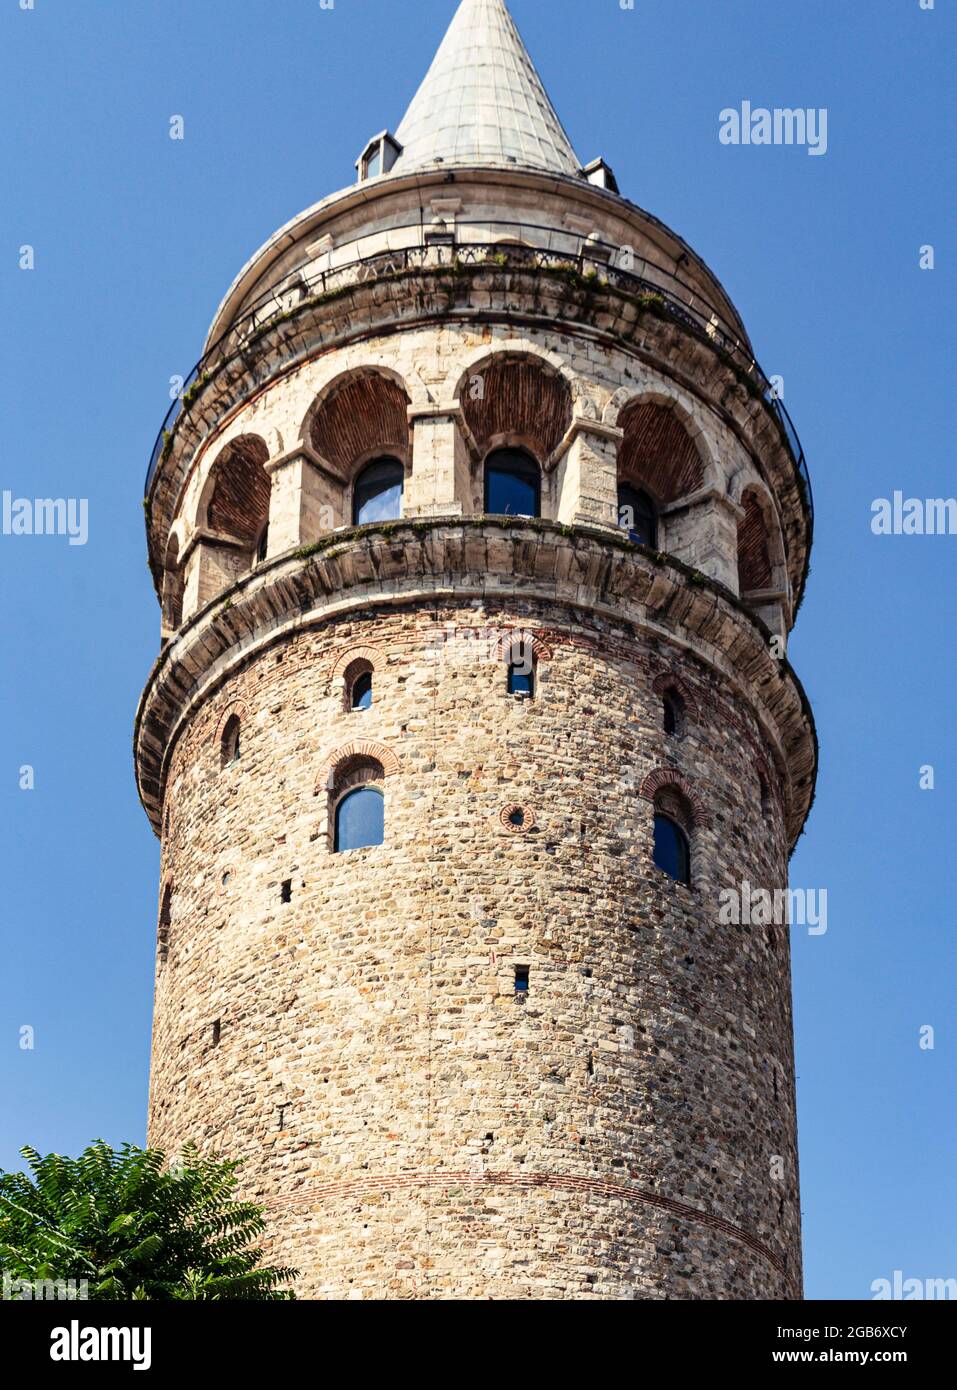 Galata Tower in low angle view under blue sky with no people Stock Photo